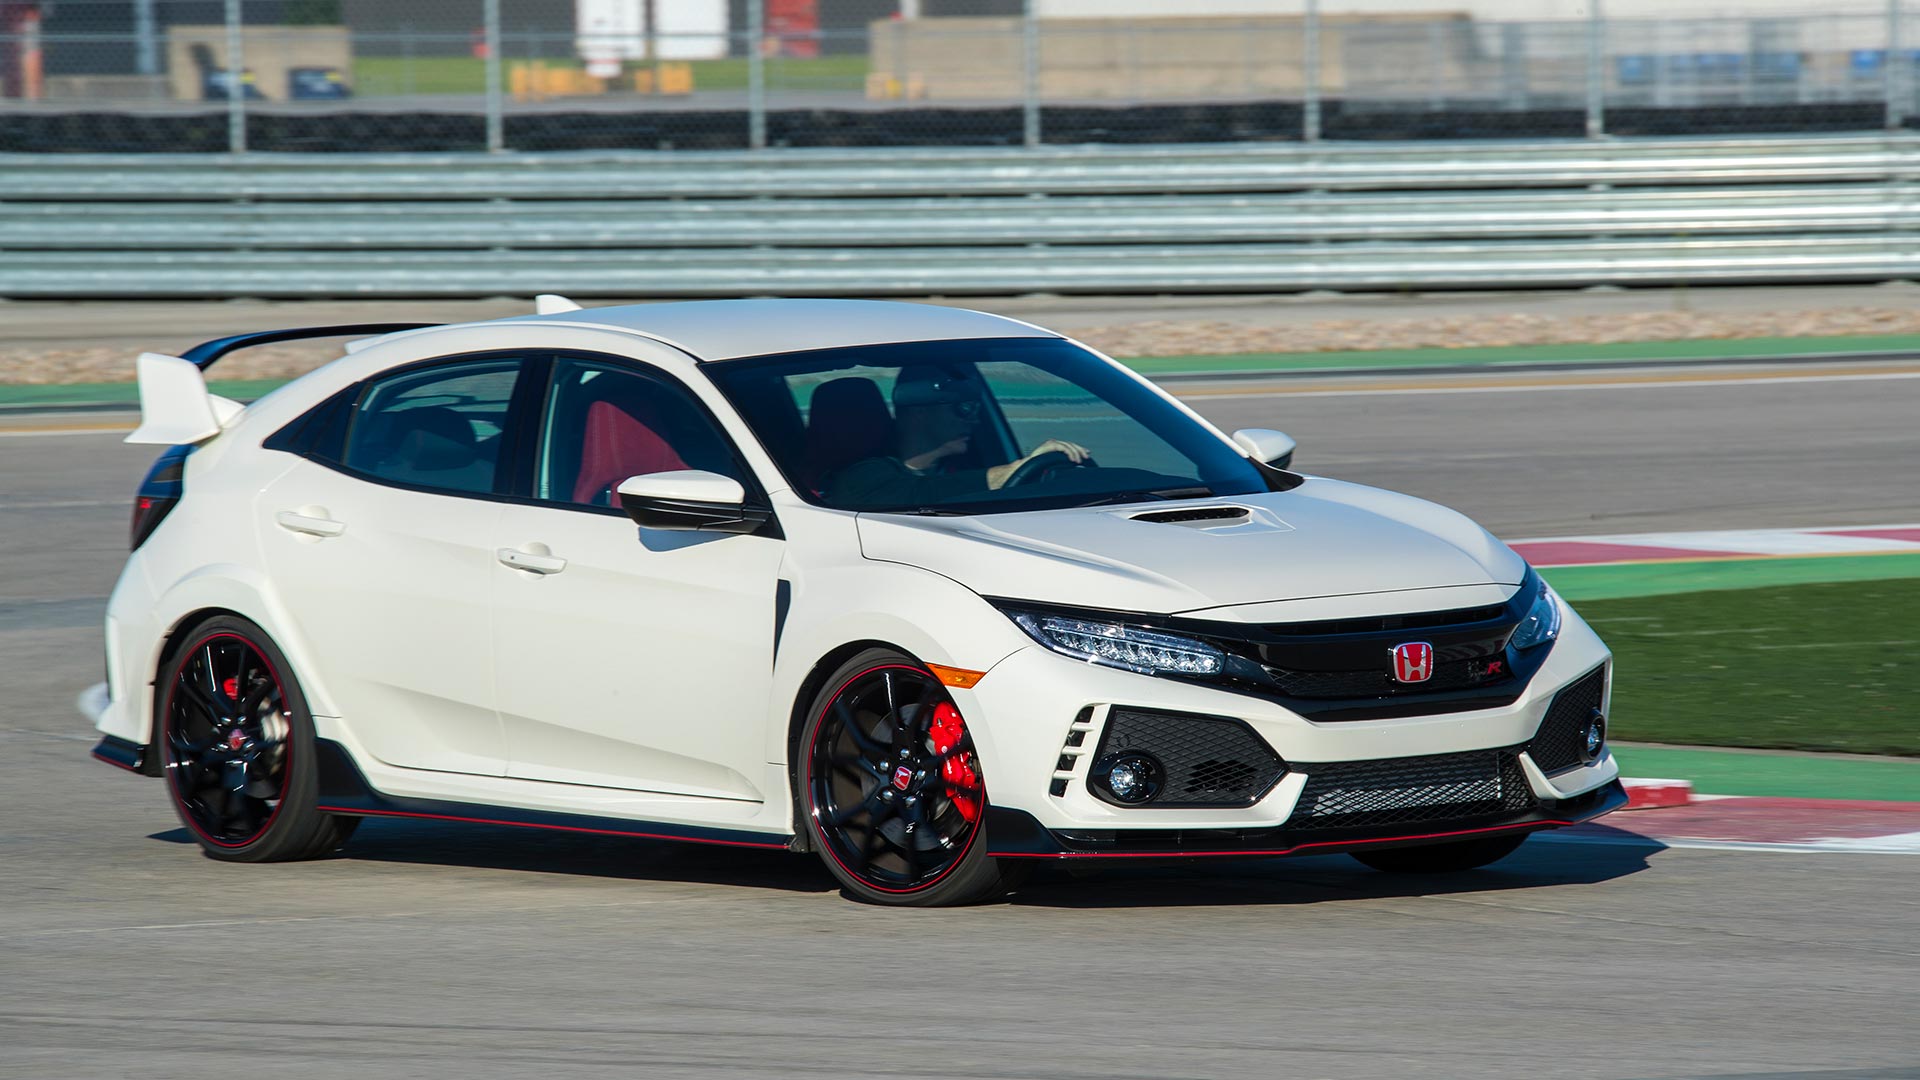 Honda Civic Type R Has No Automatic Transmission Because Itd Be Too Heavy